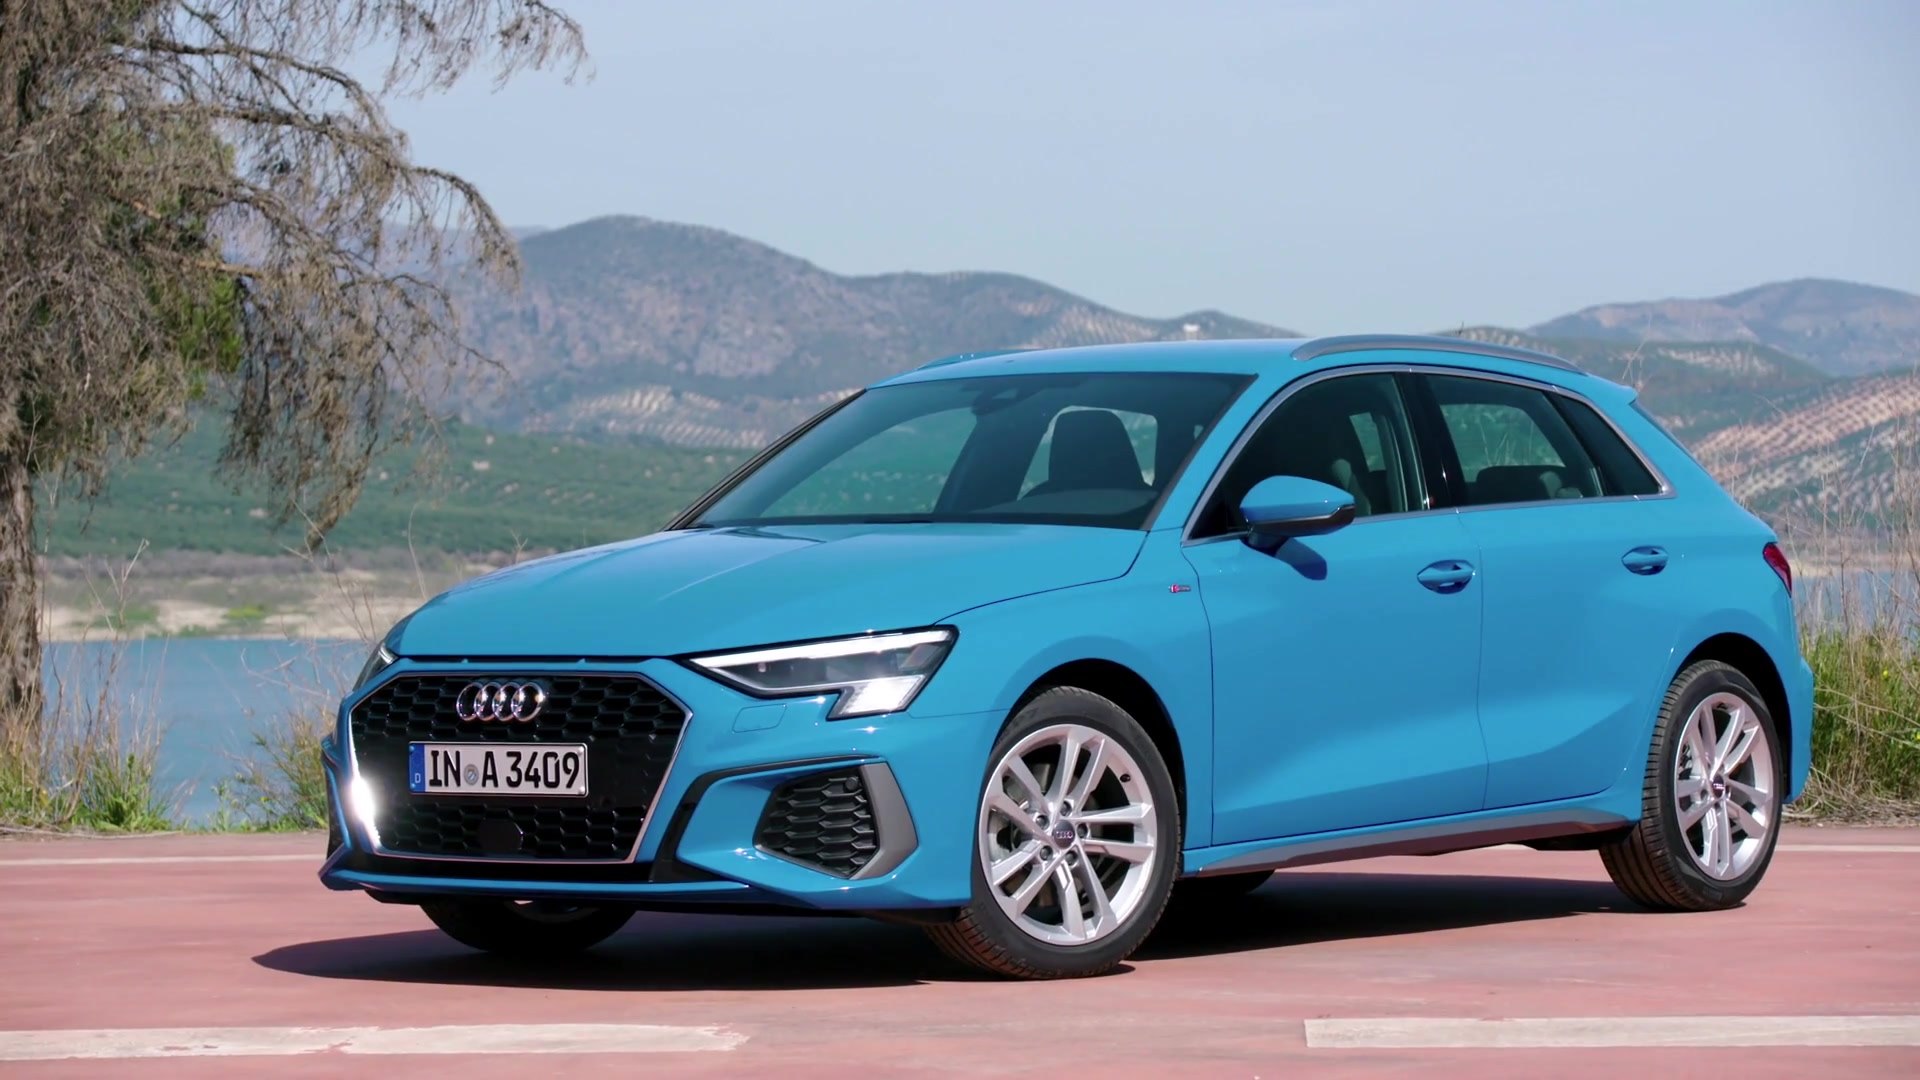 The new Audi A3 Sportback Exterior Design in Turbo blue - video Dailymotion